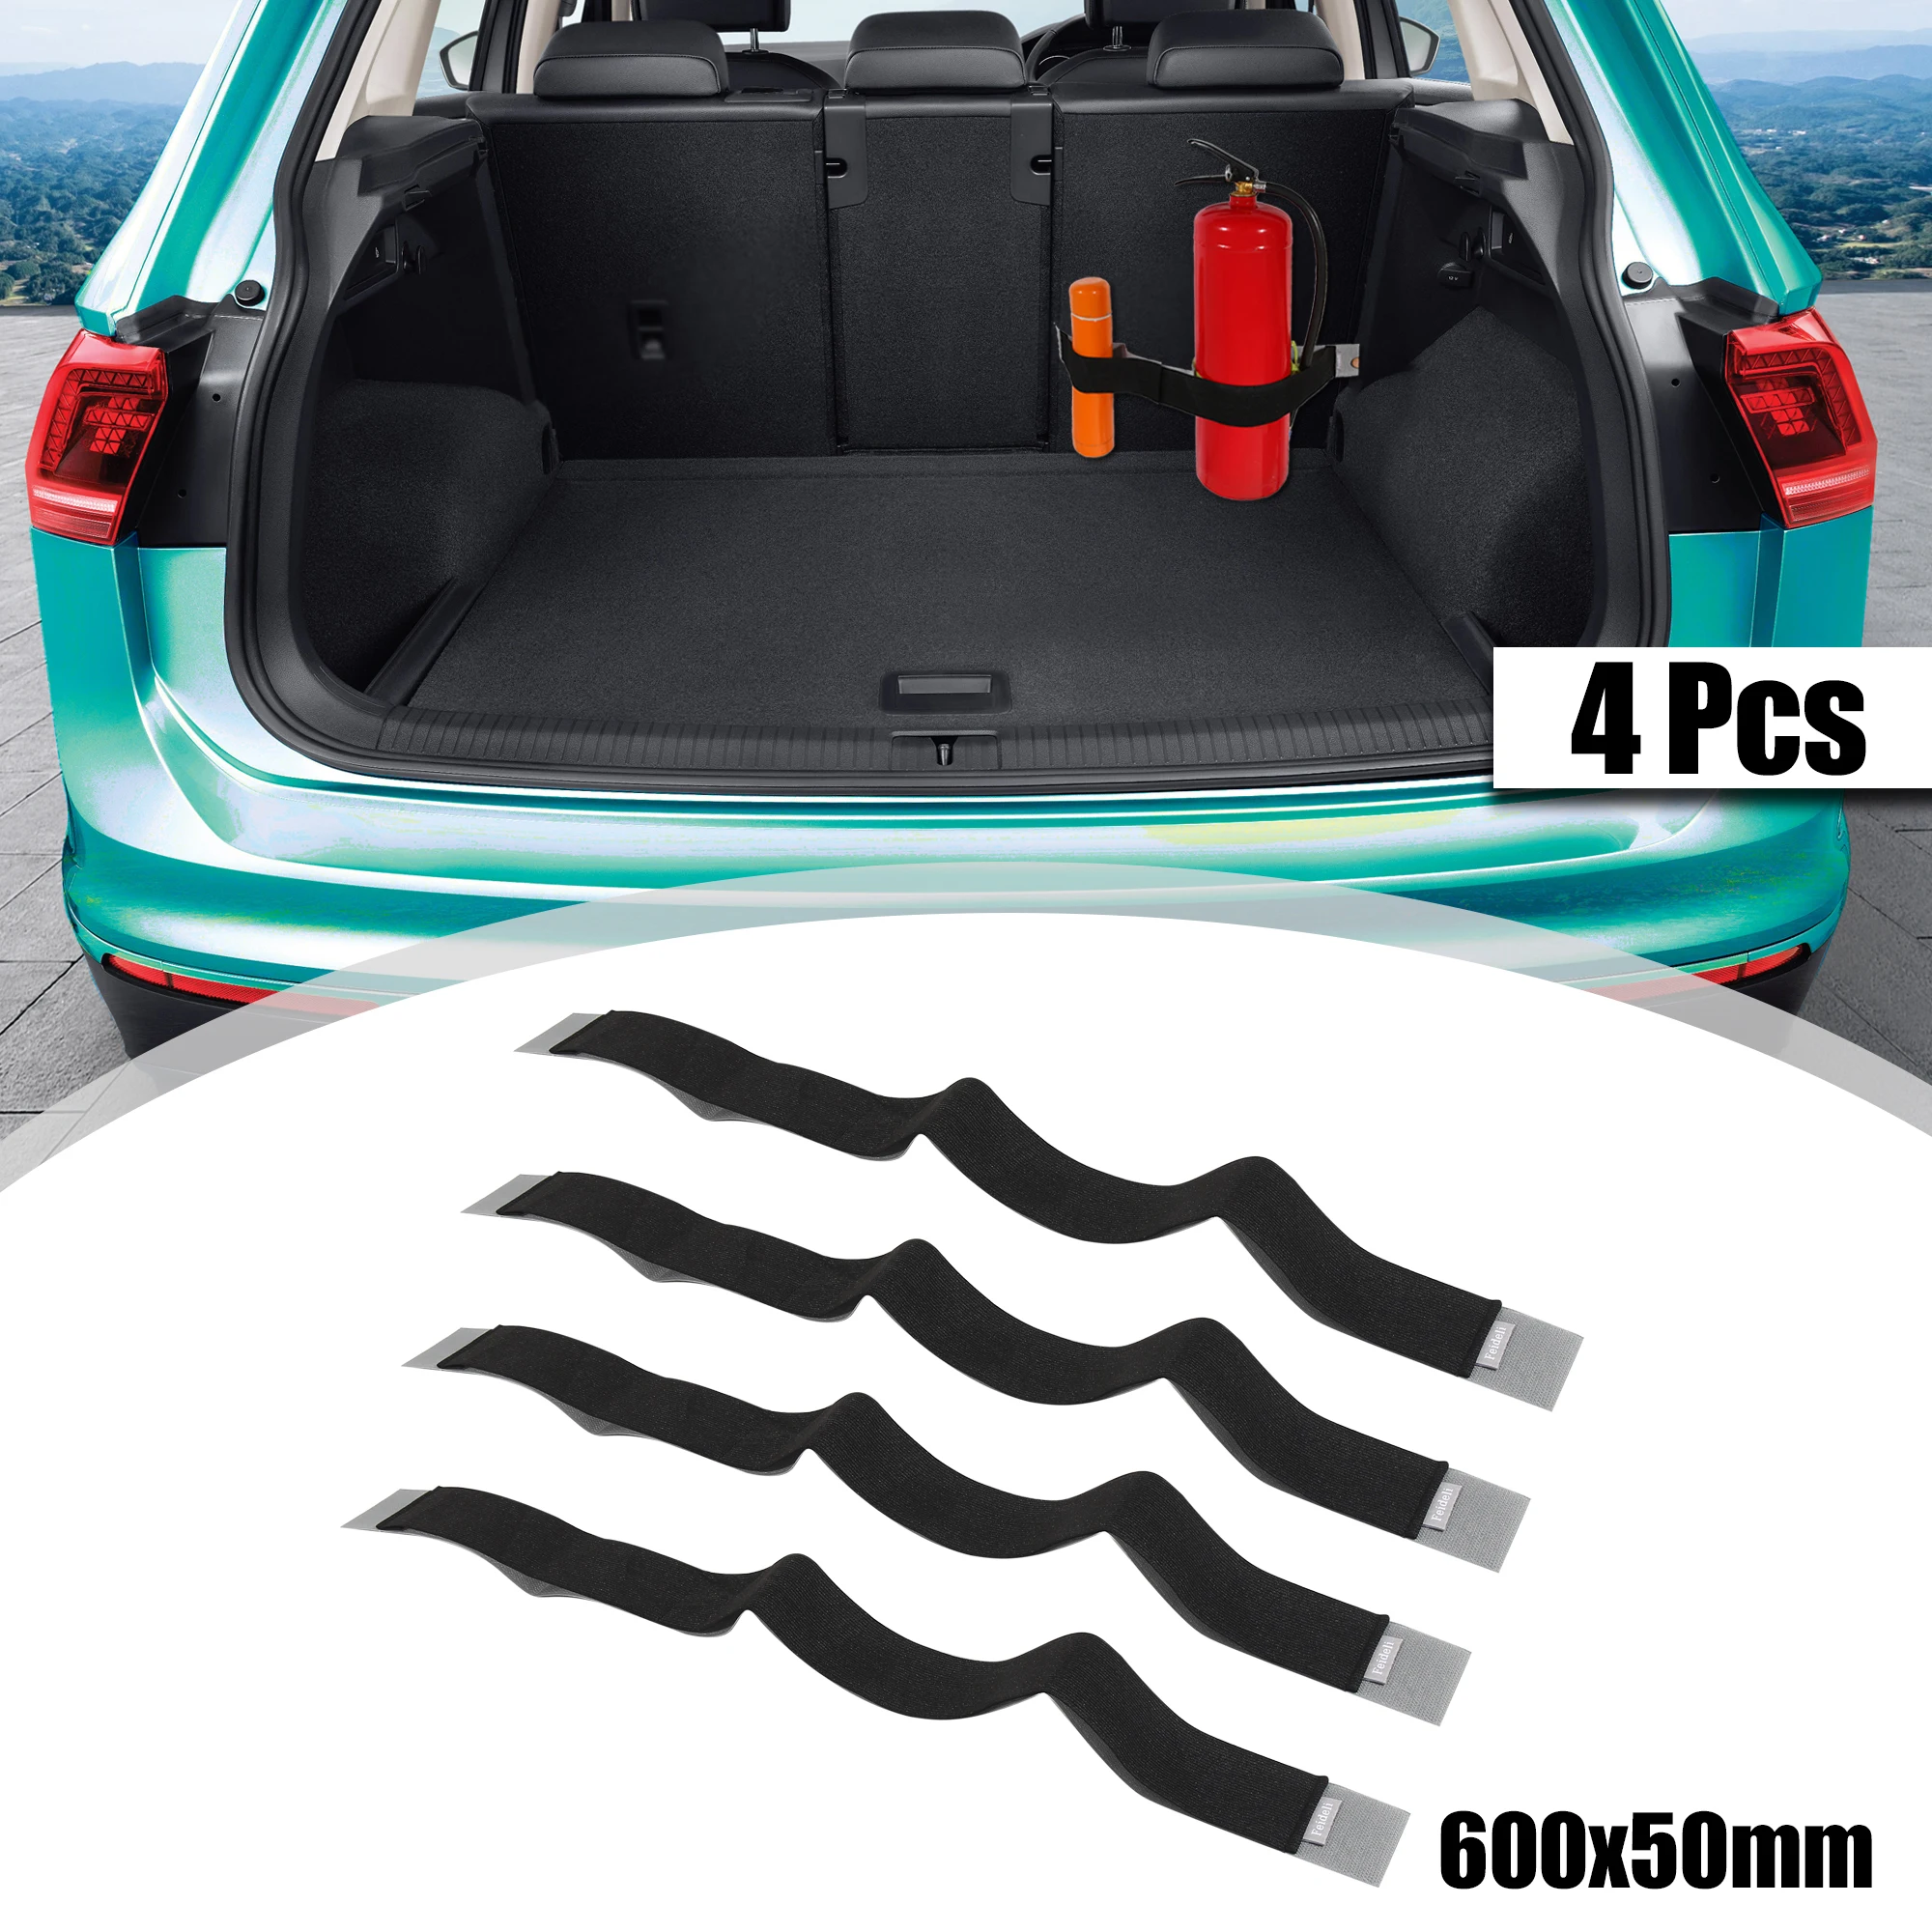  X AUTOHAUX Retractable Cargo Cover for Volkswagen for